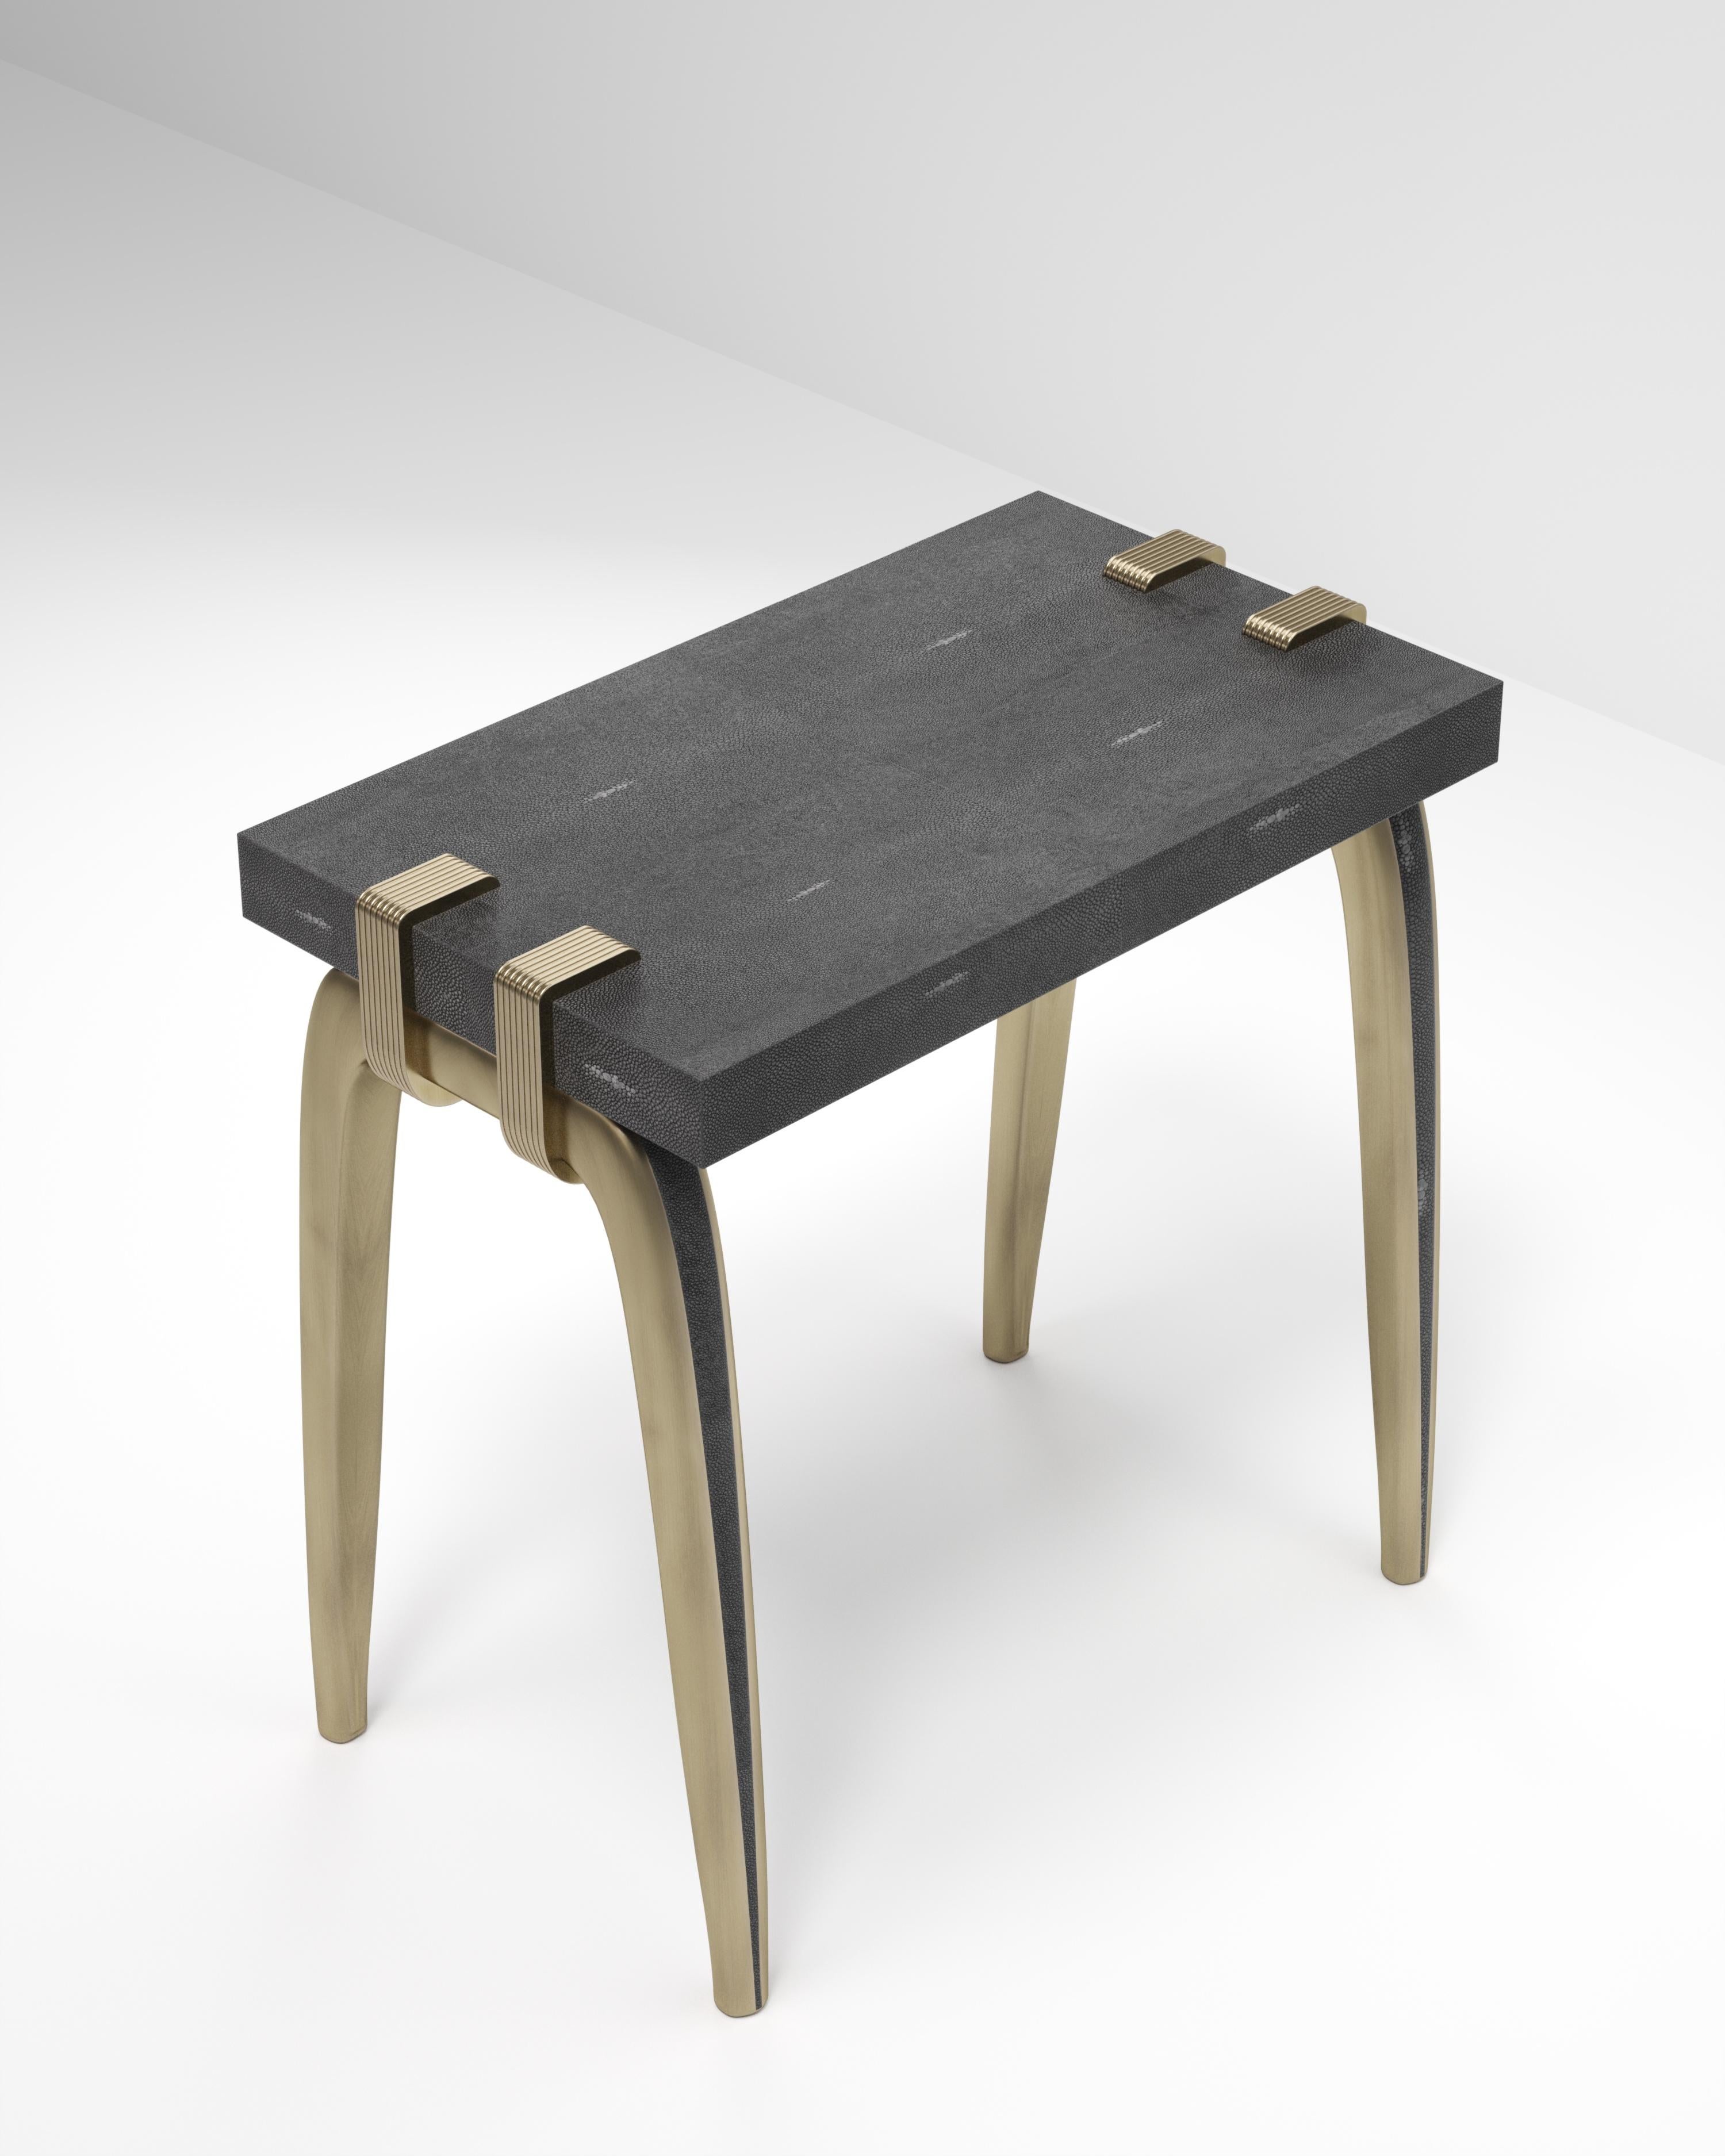 The Sonia Side table is an iconic Augousti design, showcasing the exquisite craftmanship behind the brand. The legs clasp onto the side of the black shagreen rectangle top. This piece is a nod to the Art-Deco period while remaining contemporary in